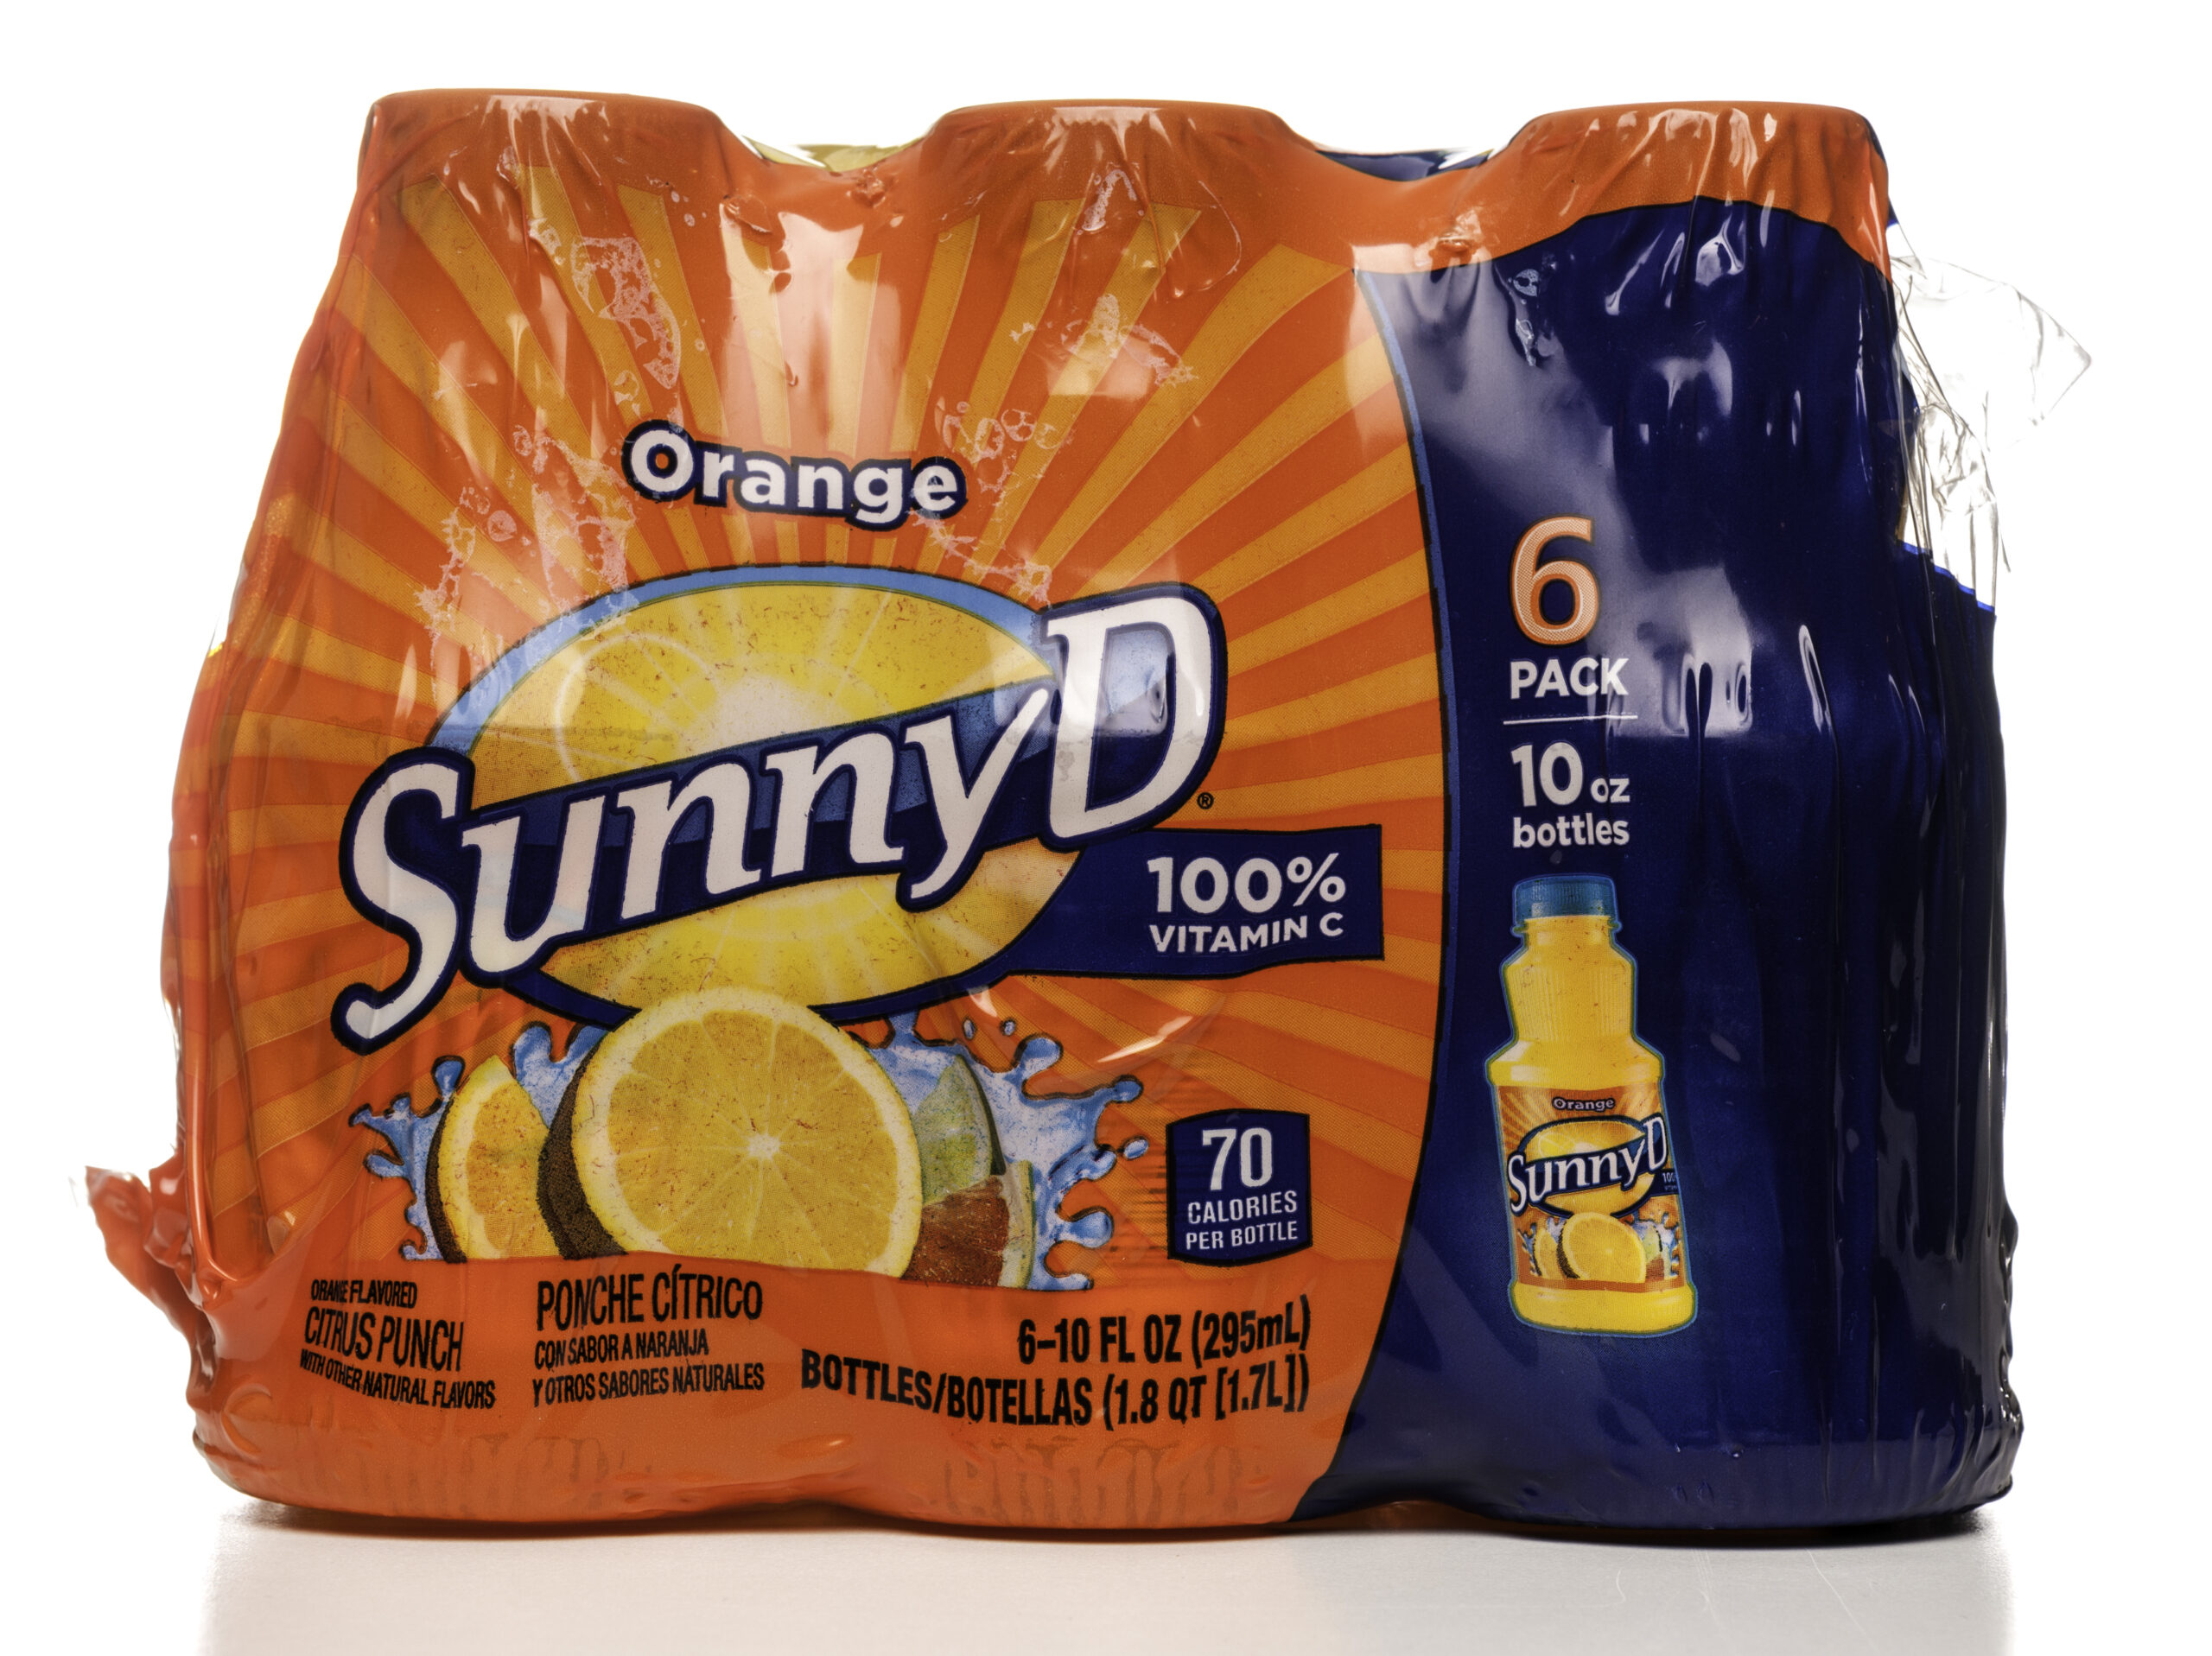 Miami, USA - October 03, 2013: SunnyD Orange citrus punch 10 OZ bottles 6 pack. SunnyD brand is owned by Procter & Gamble